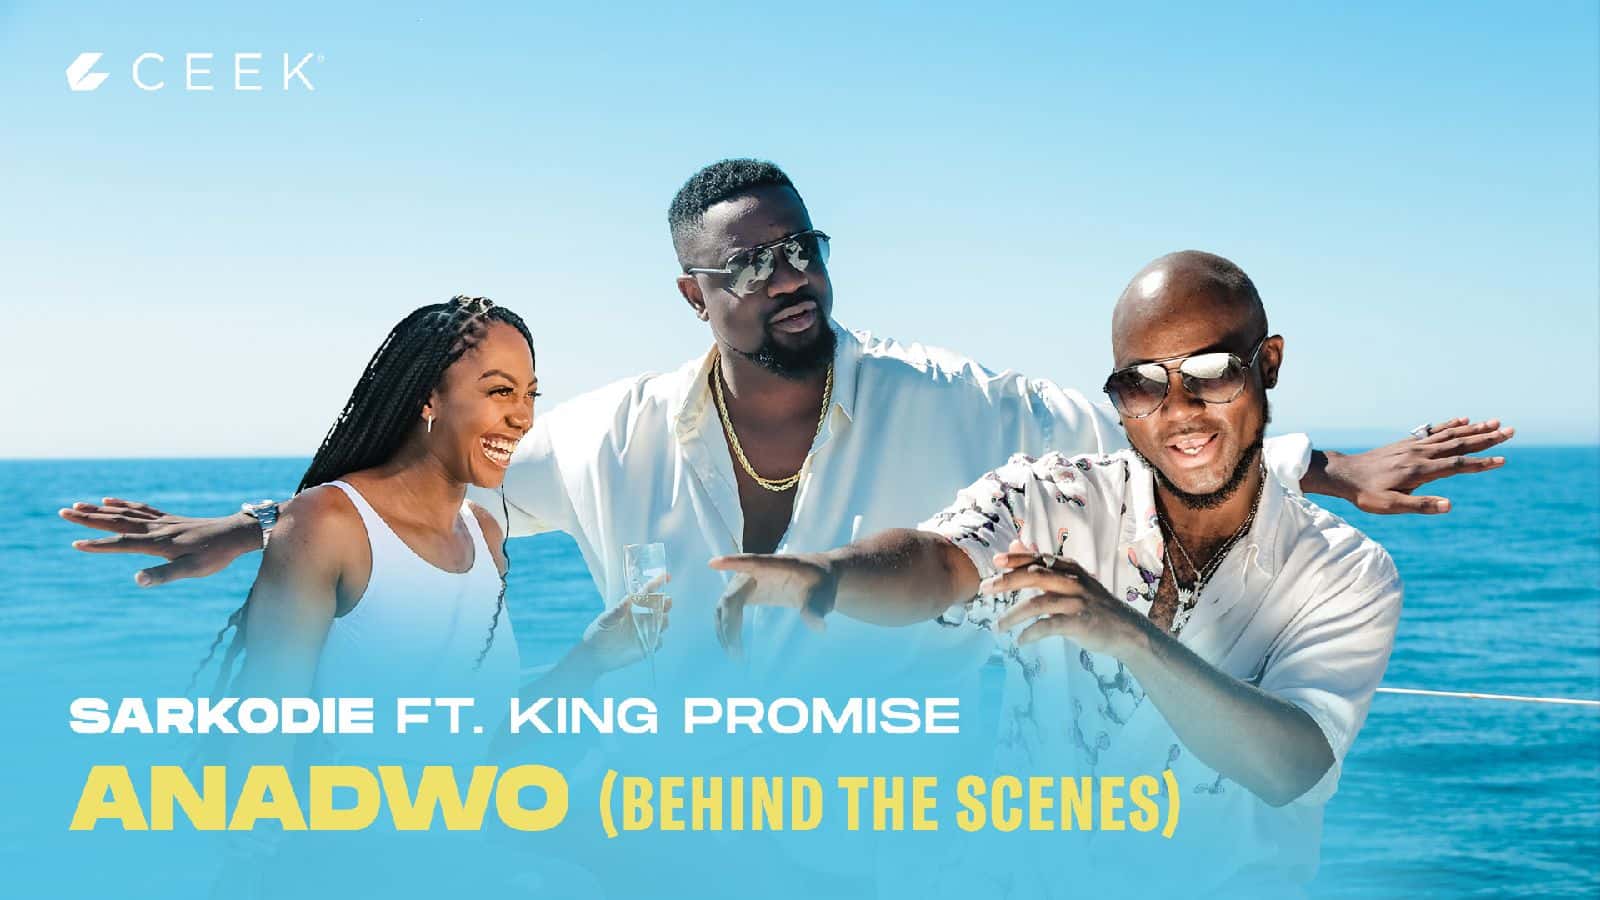 King Promise, Sarkodie Anadwo featuring King Promise - Behind The Scenes